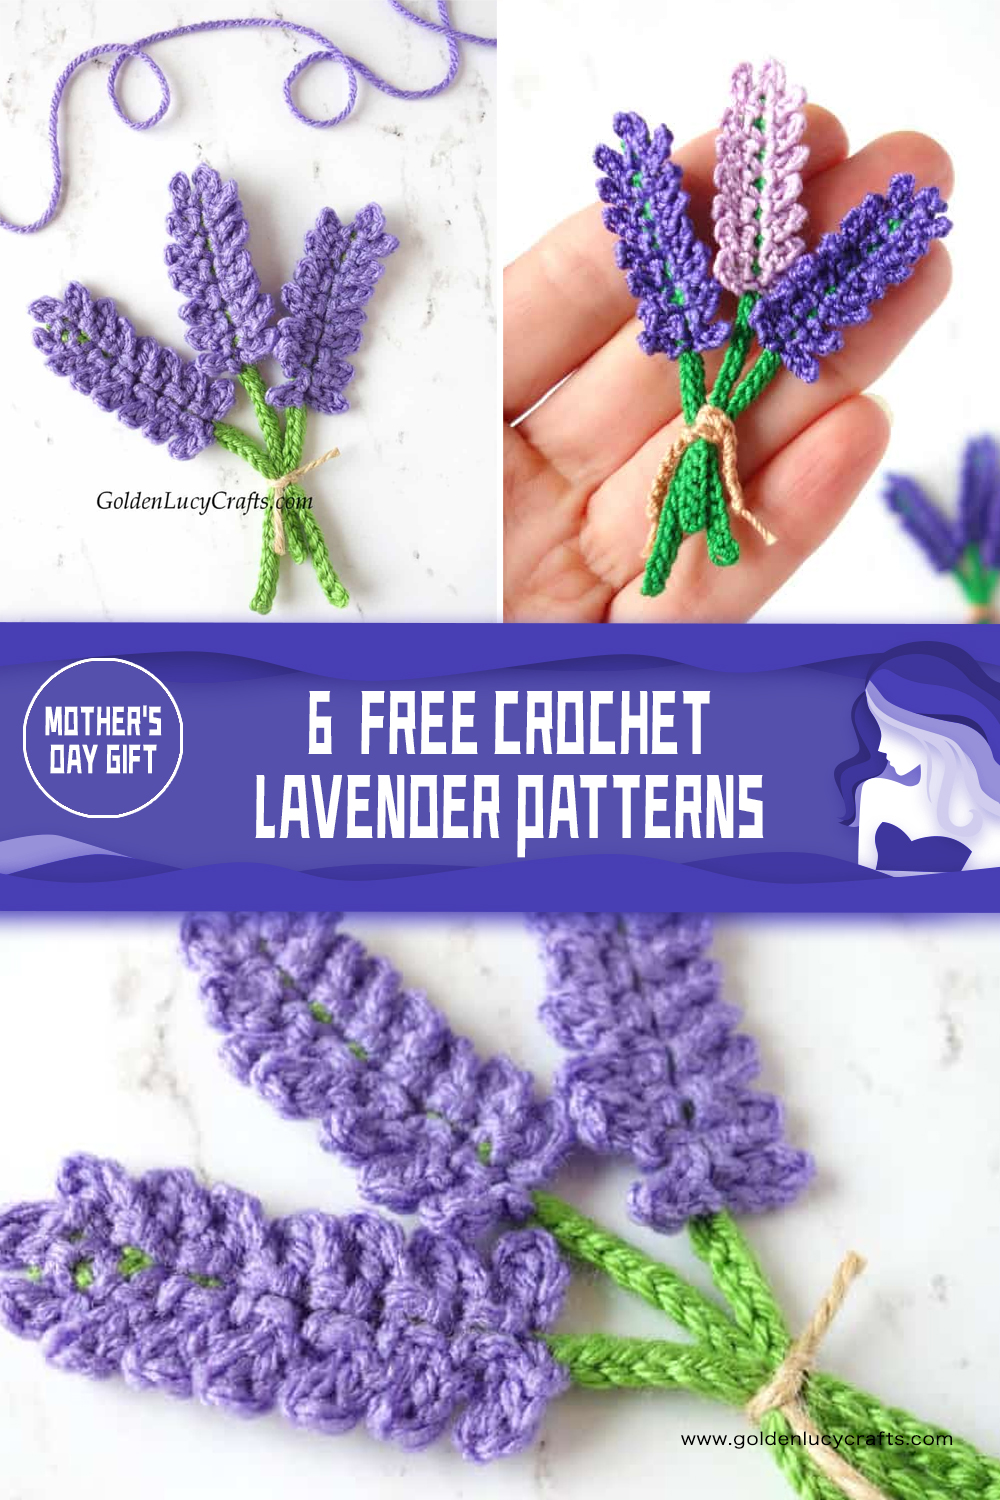  FREE Crochet Lavender Patterns - Mother's Gift